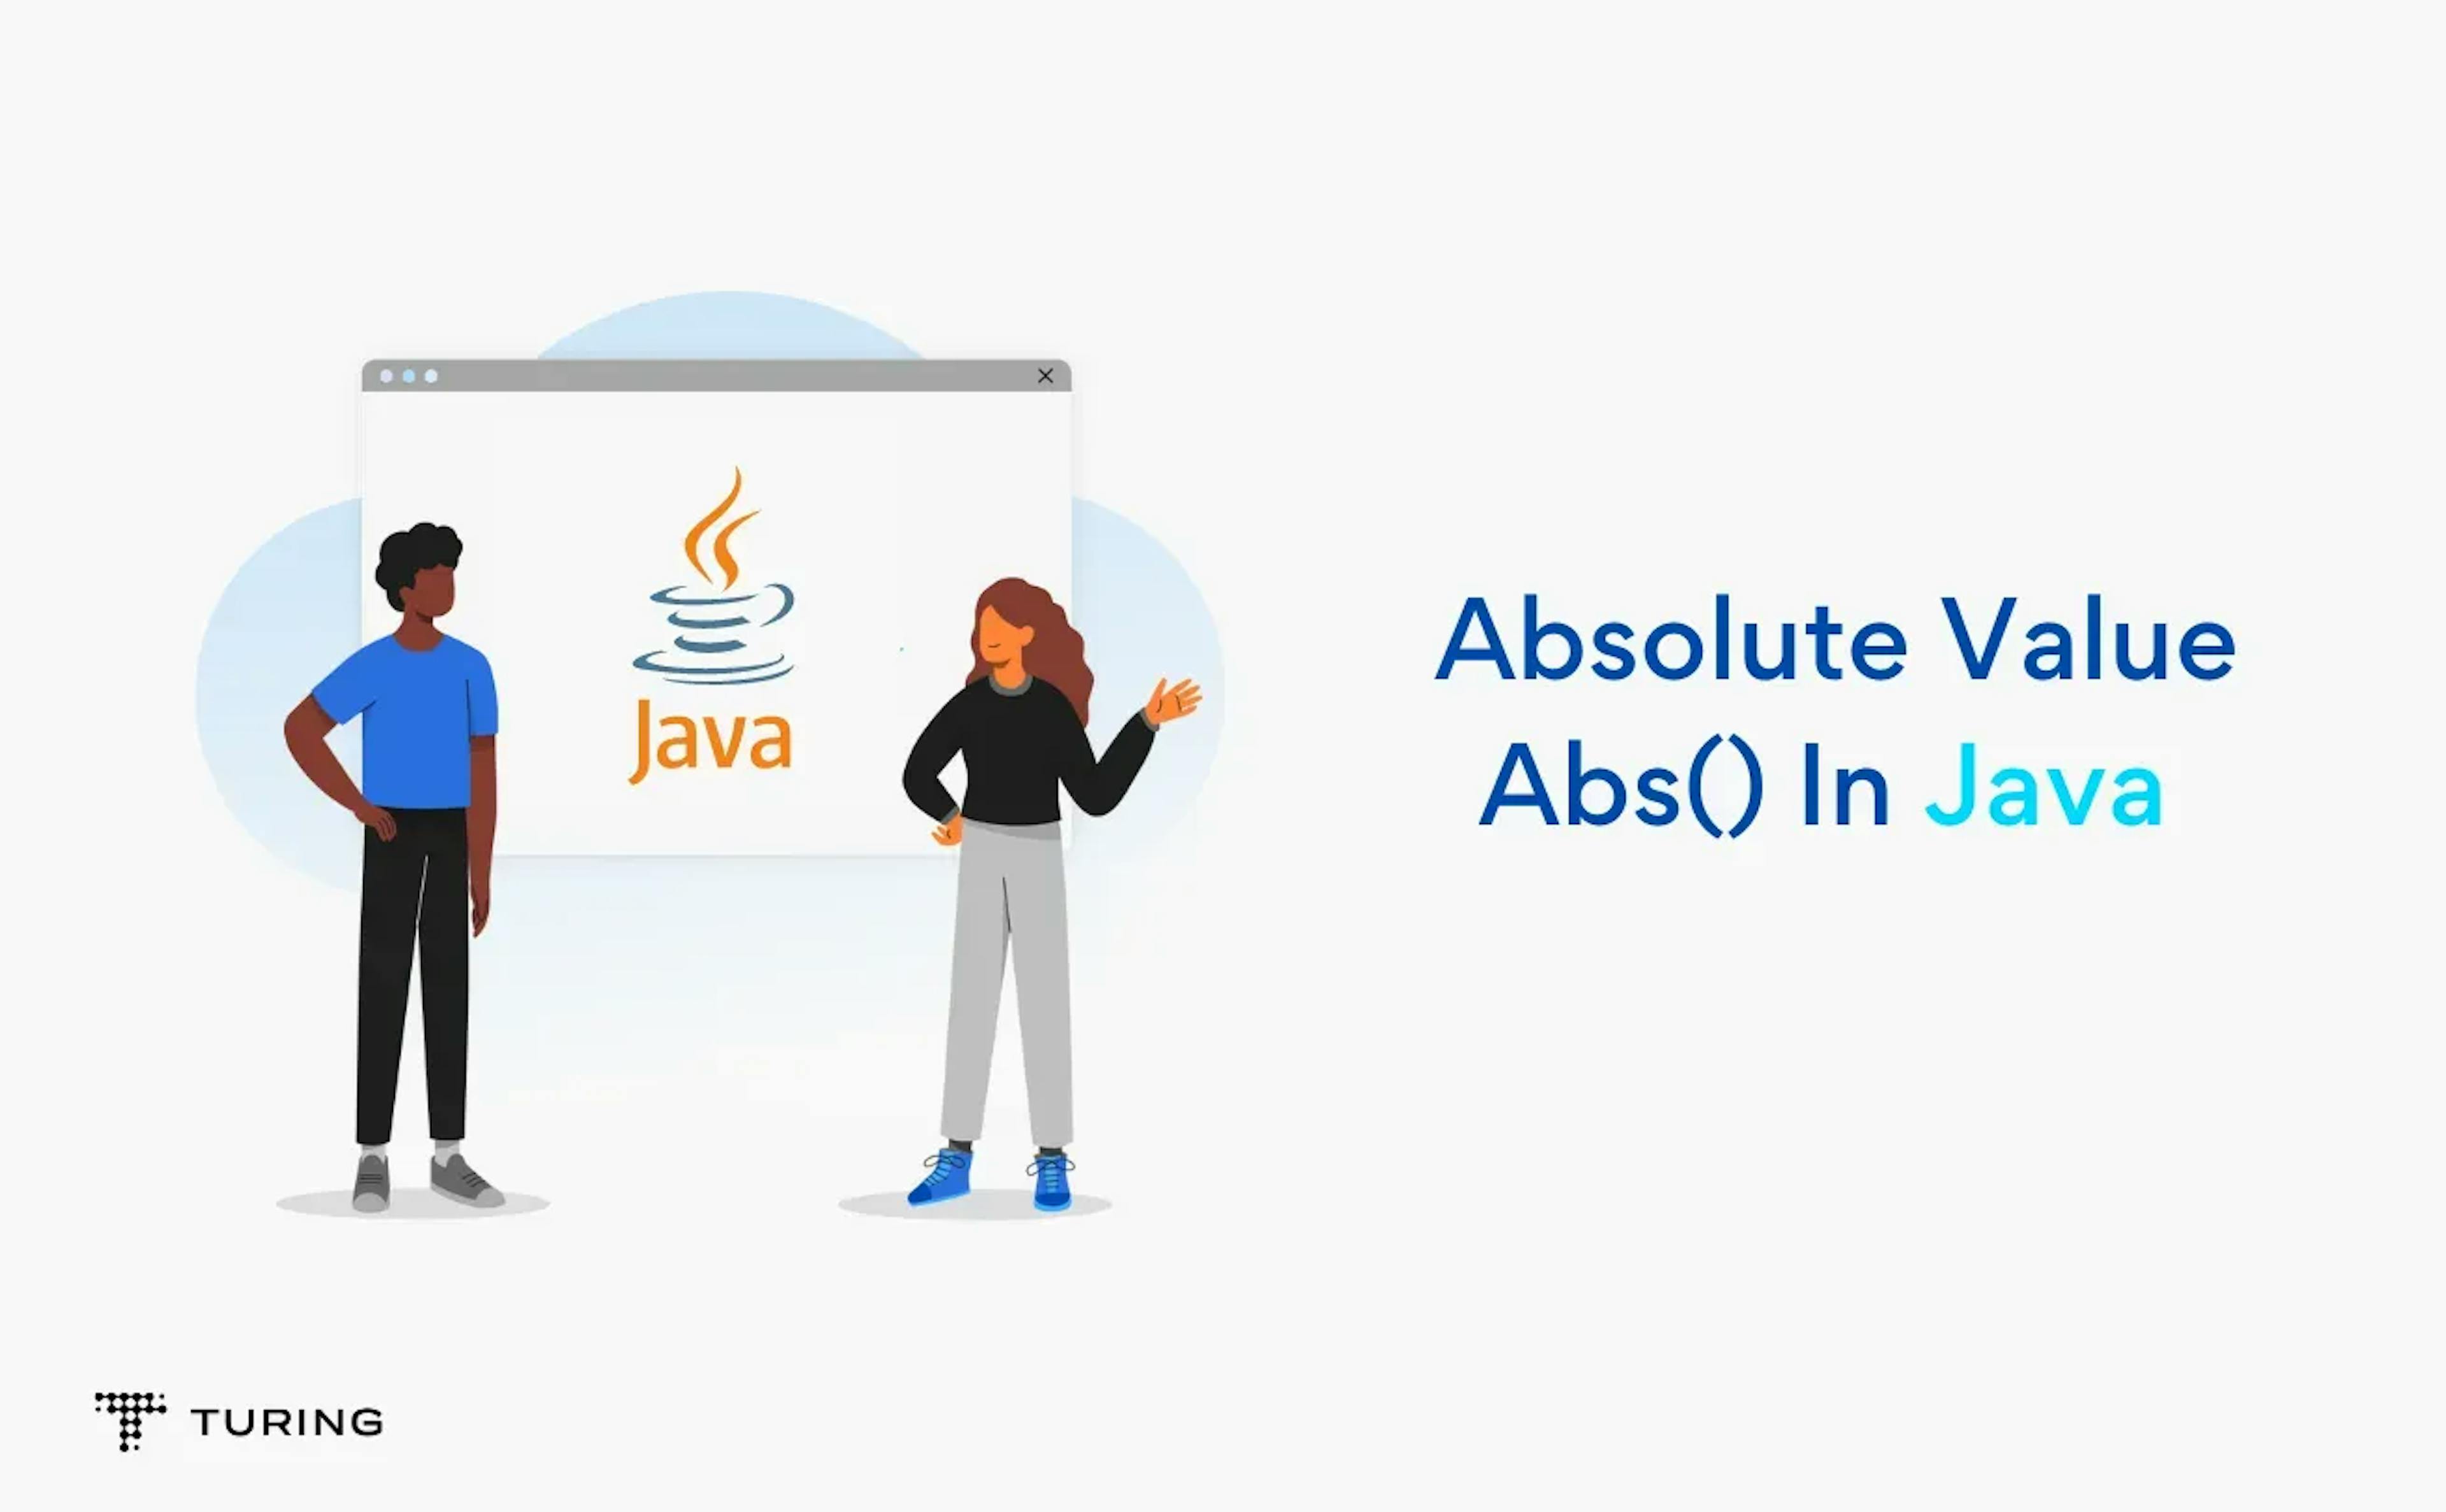 Absolute Value Abs() in Java